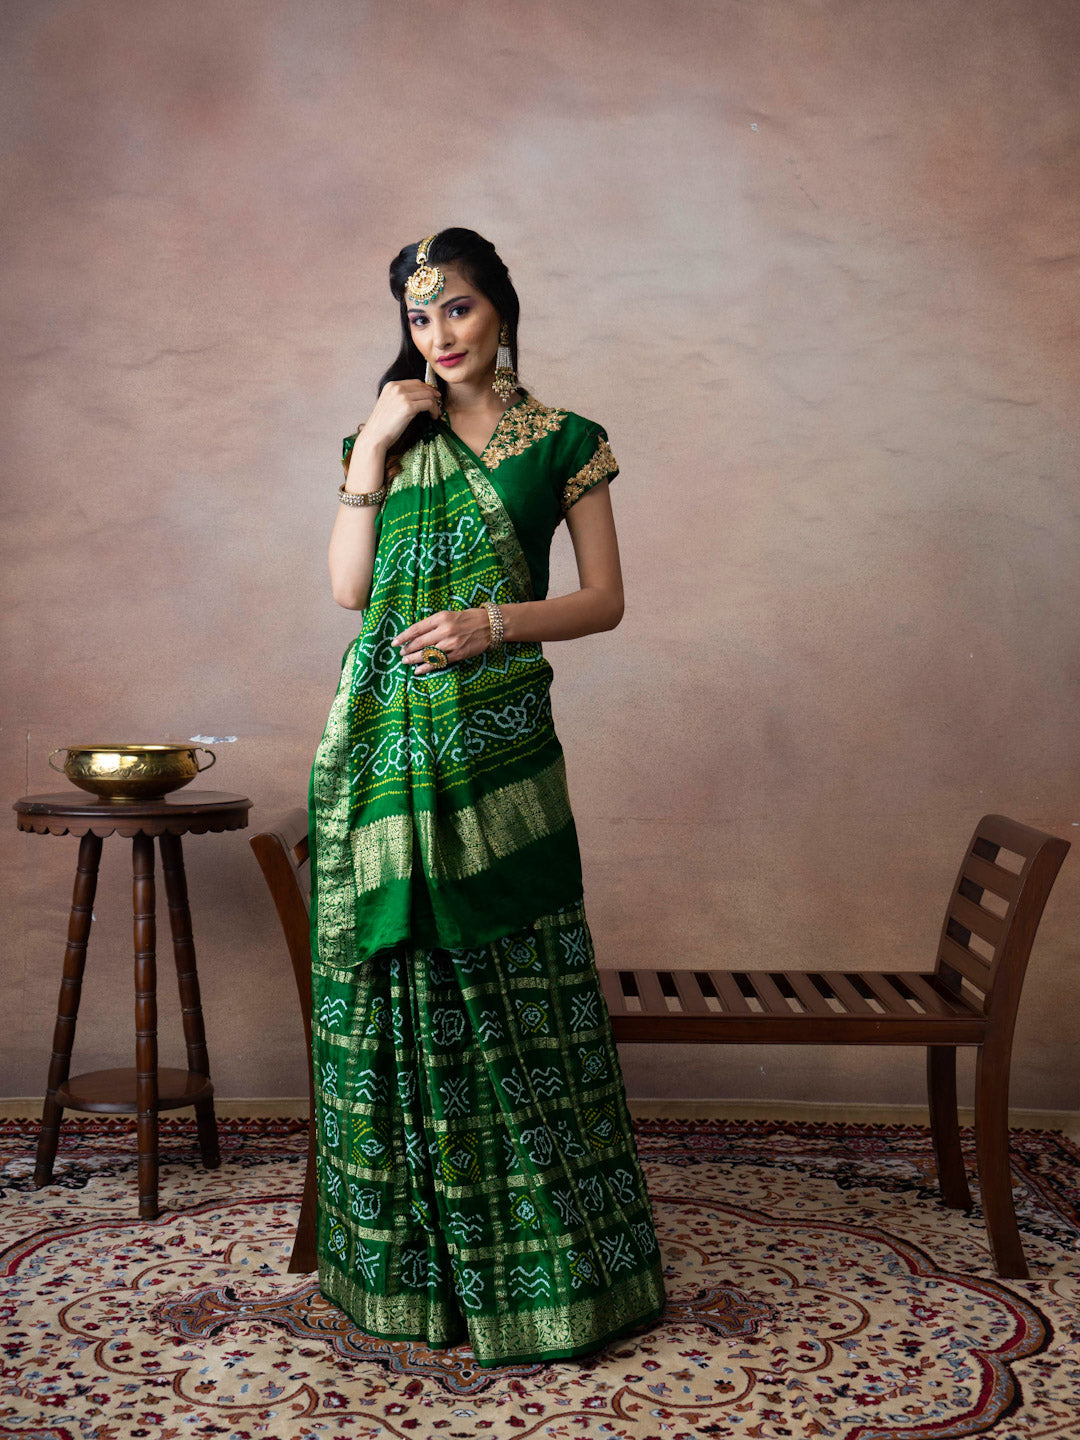 10 Stunning Gujarati Saree Designs Handpicked for Your Trousseau